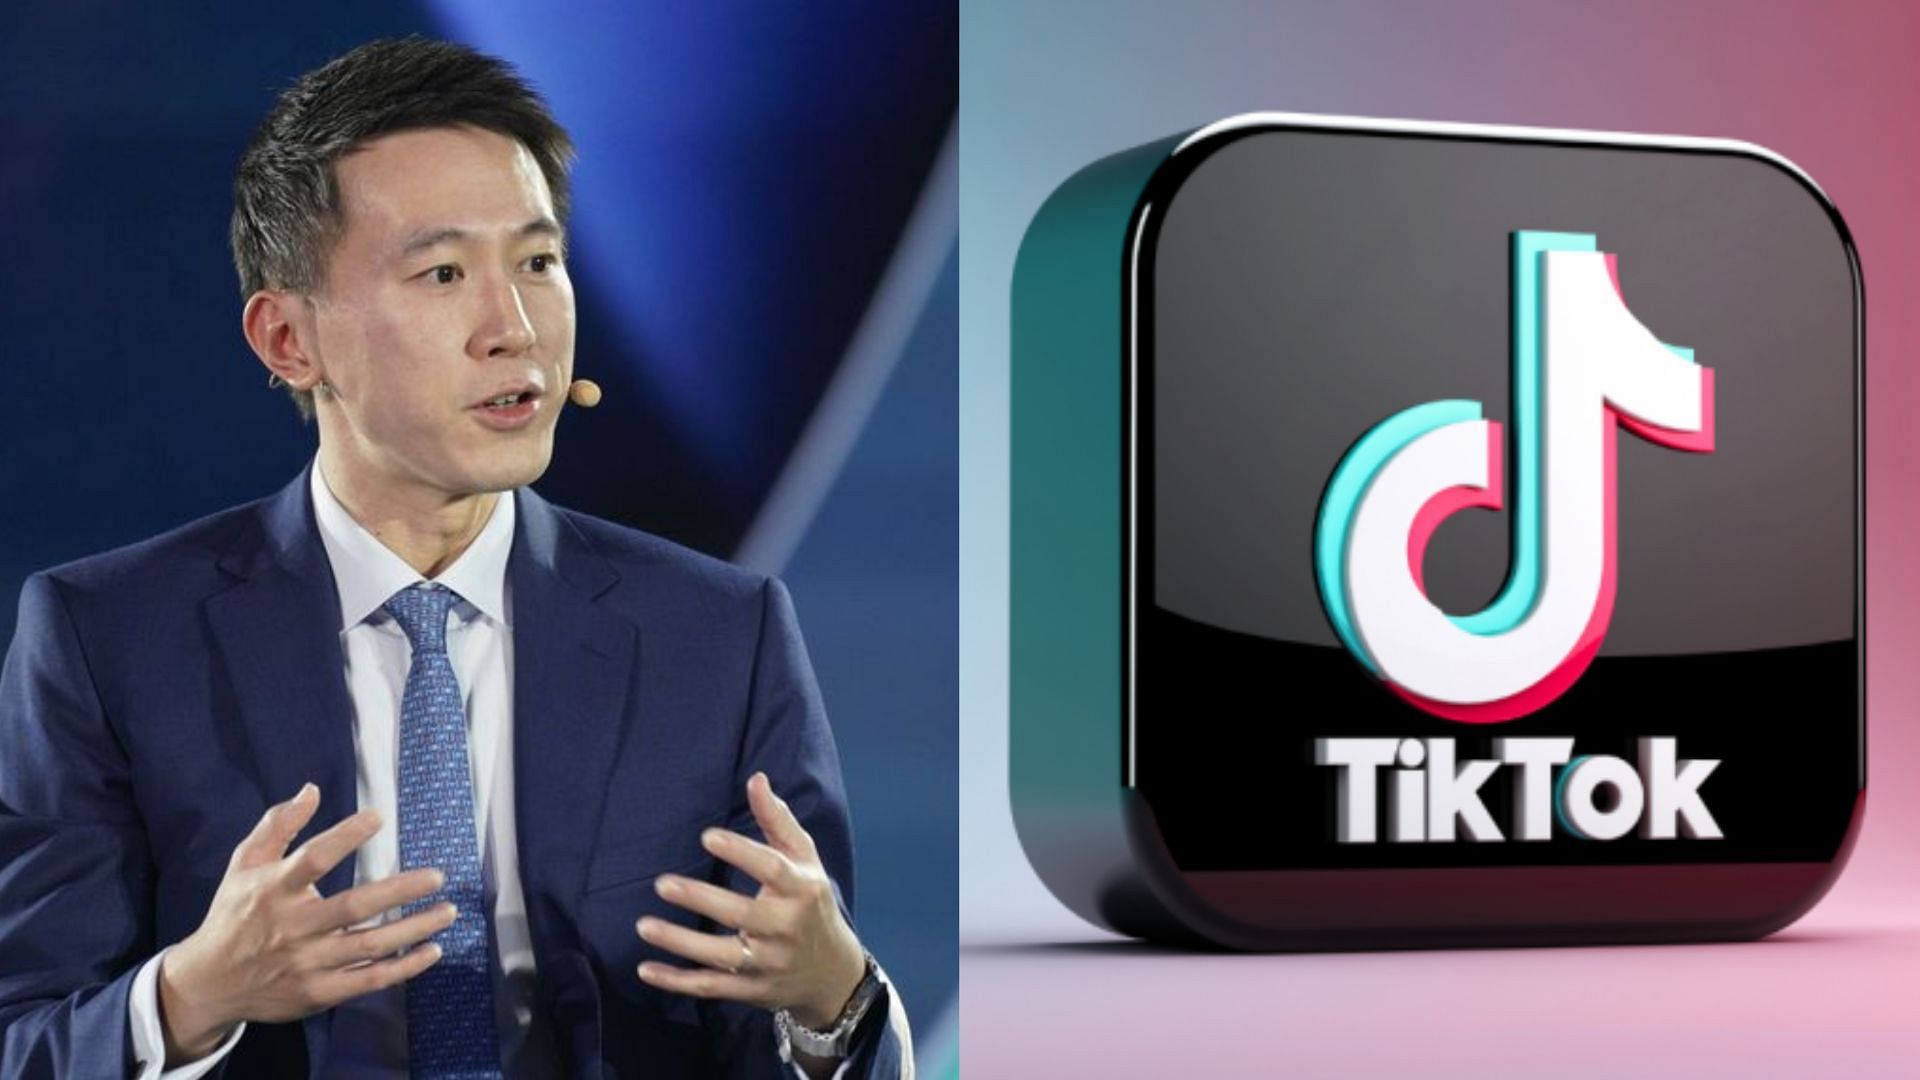 TikTok CEO Shou Zi Chew gave his testimony before Congress on Thursday regarding why the app should not be banned. (Image via Getty Images, iStock Images)